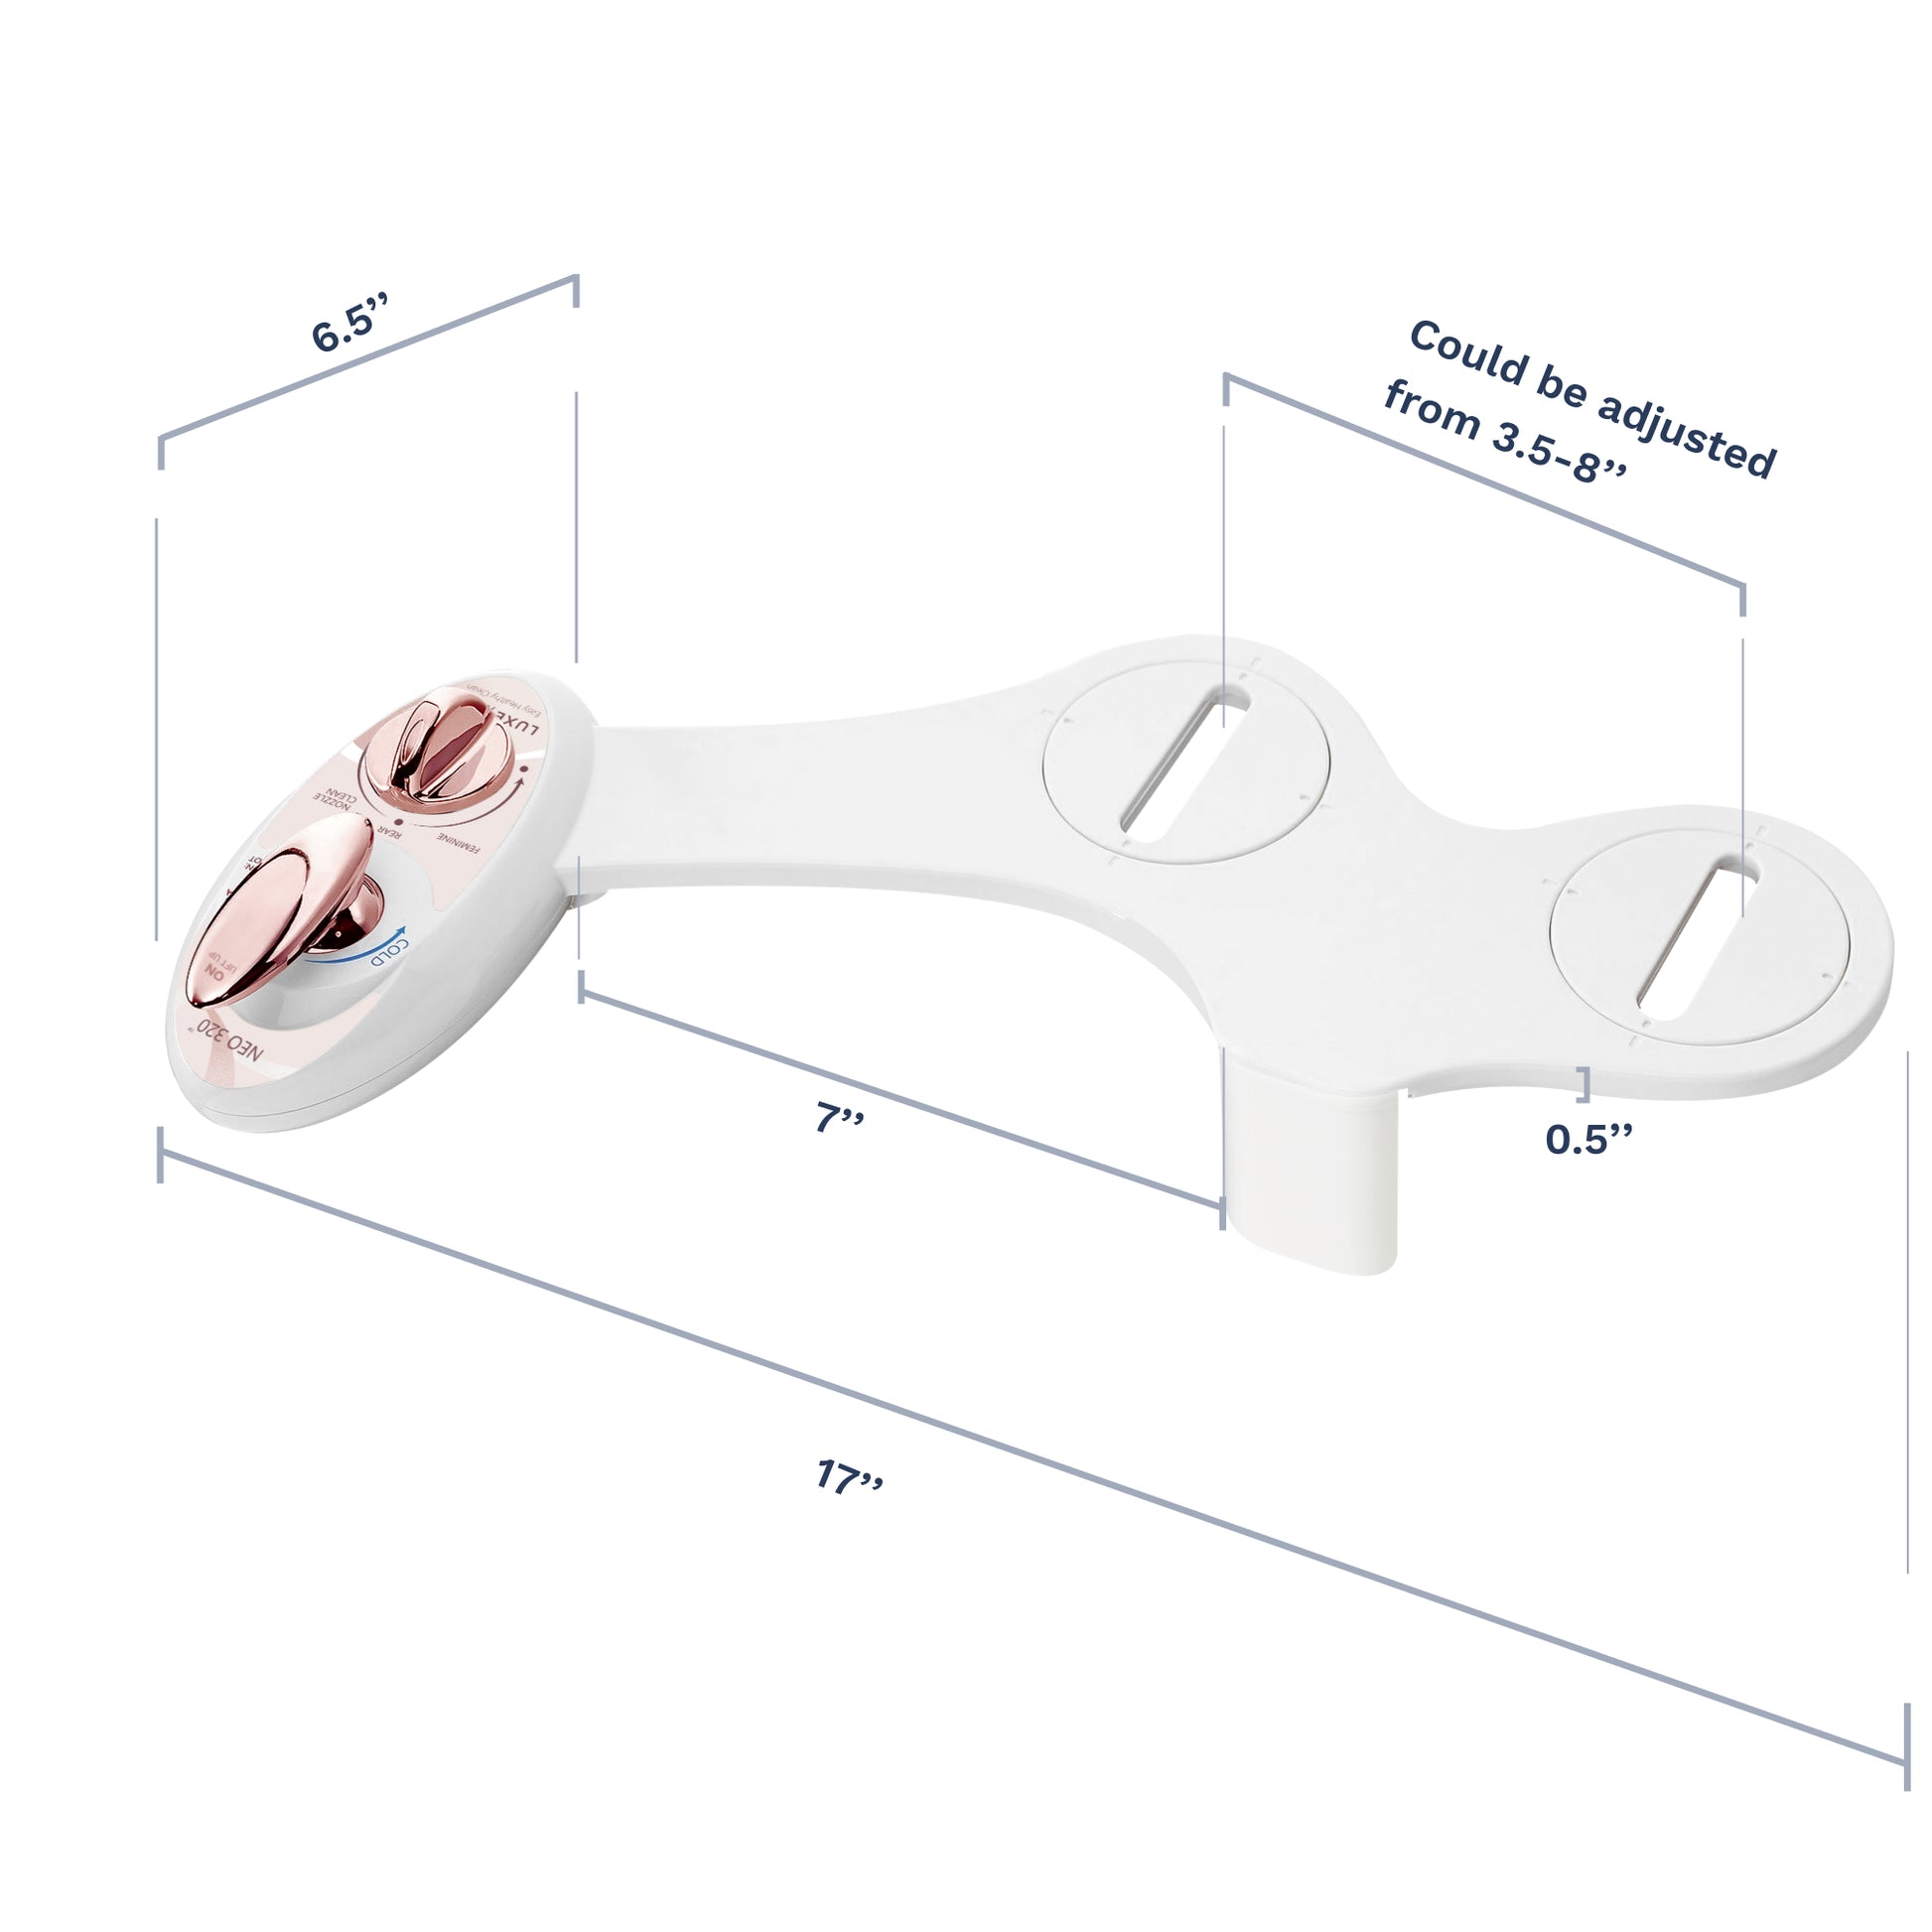 NEO Measurements: 17" long bidet, 6.5" long control panel, 7" distance between control panel to guard gate, and 0.5" thick